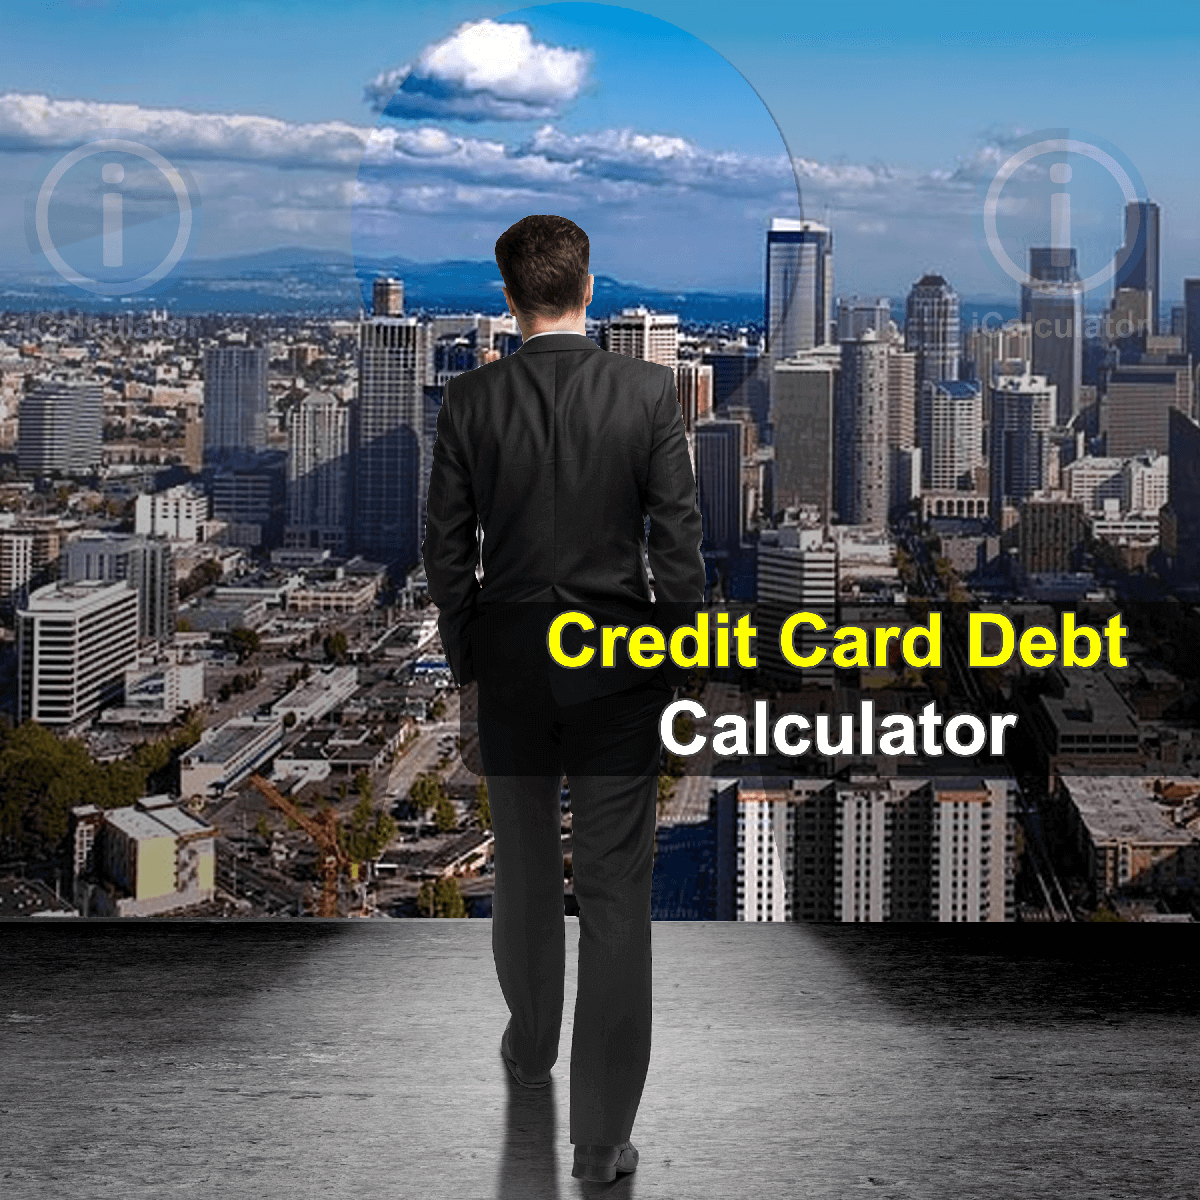 Credit Card Payoff Calculator. This image provides details of how to calculate credit card debt using a calculator and notepad. By using the credit card formula, the Credit Card Payoff Calculator provides a true calculation of the how to reduce your monthly credit card debt to lead a more stress free life.